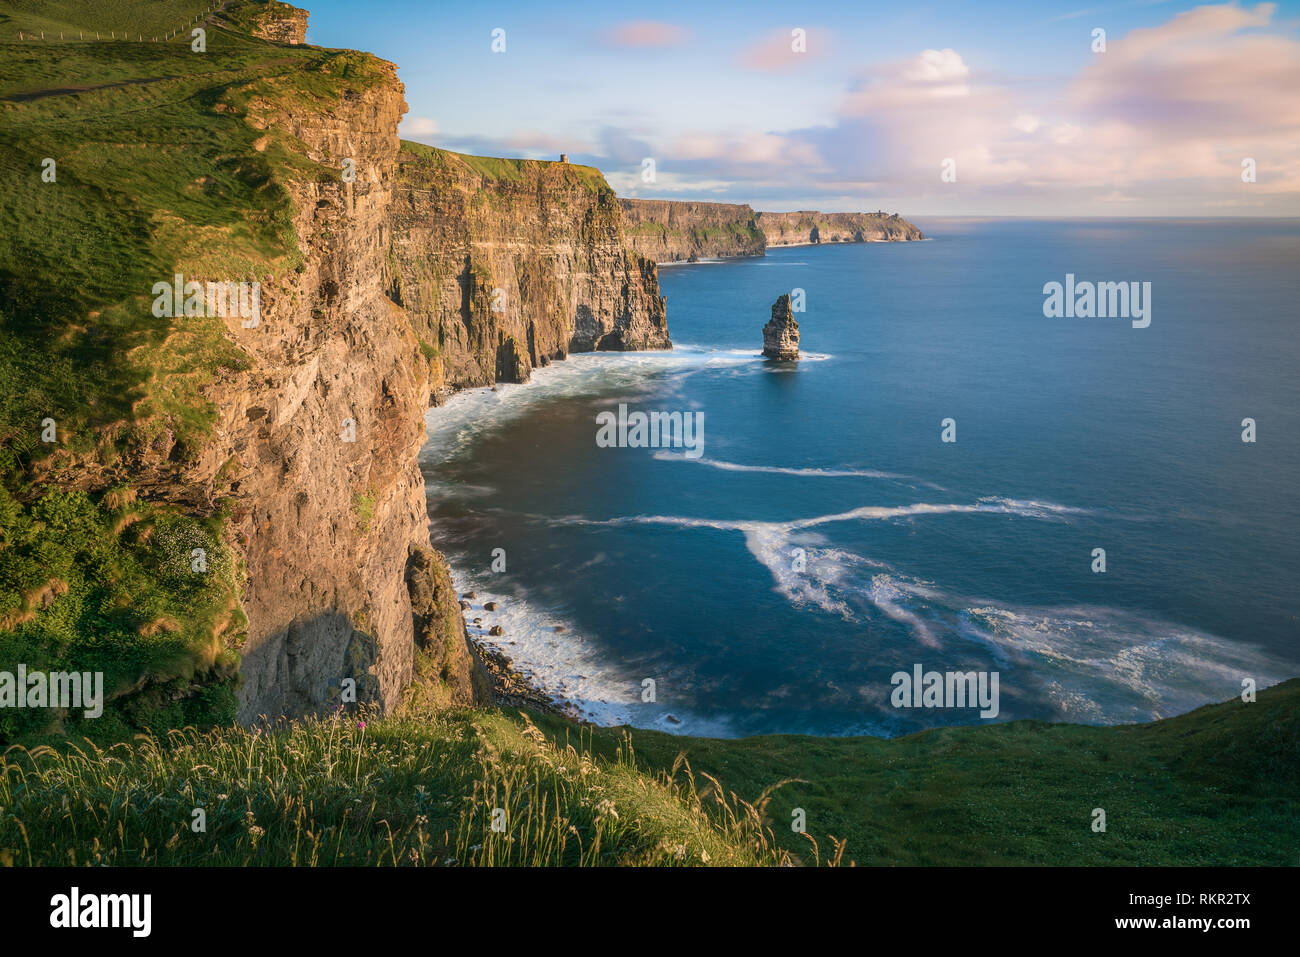 The spectacular Cliffs of Moher, in County Clare, are one of Ireland's most popular tourist attractions, receiving a million visitors a year. Stock Photo